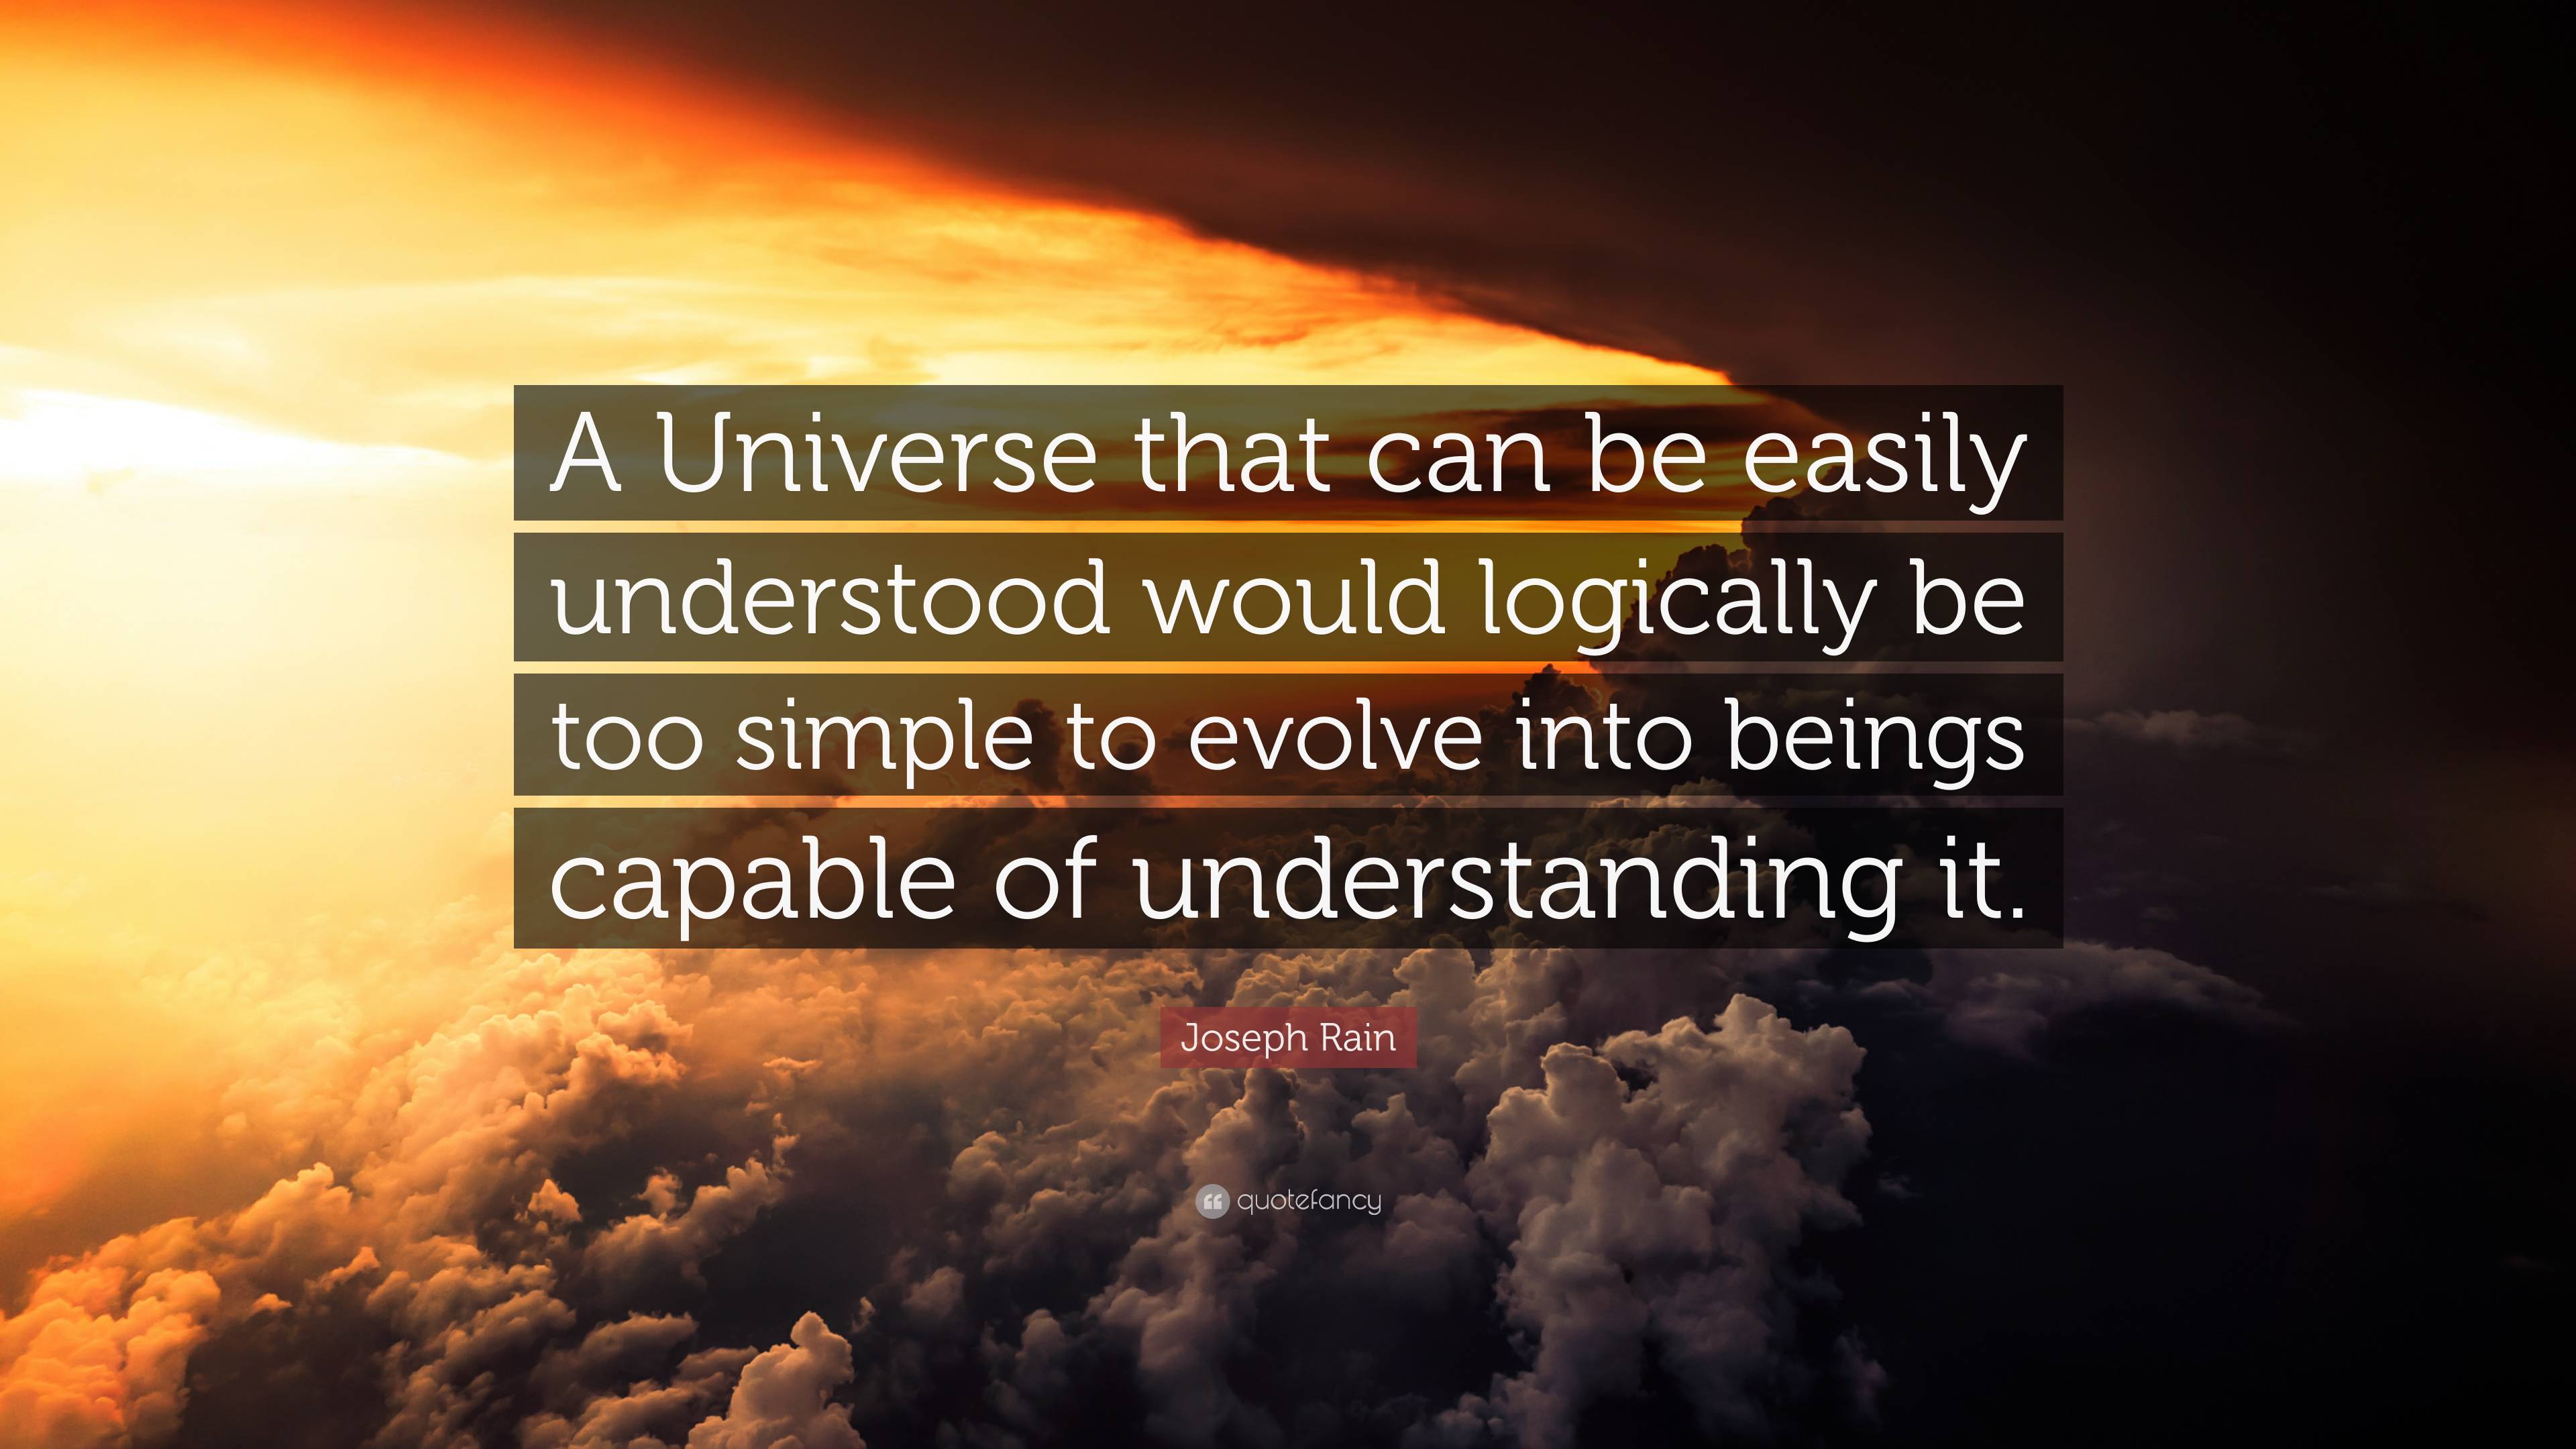 Joseph Rain Quote: “A Universe that can be easily understood would ...